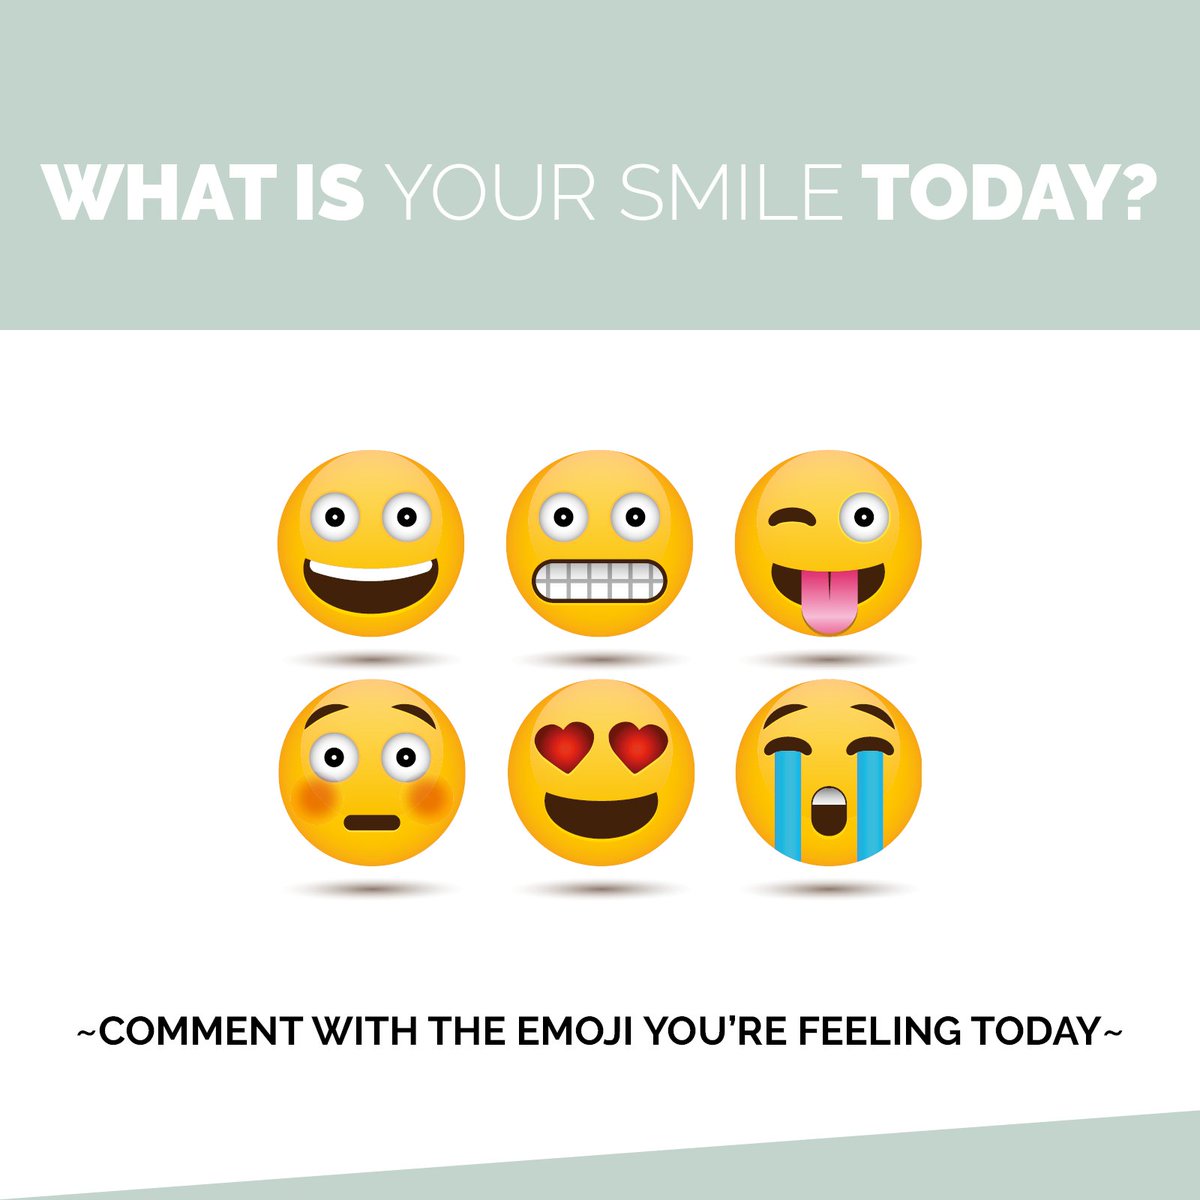 White Smiles How Are You Feeling Today Post An Emoji That Best Represents Your Mood